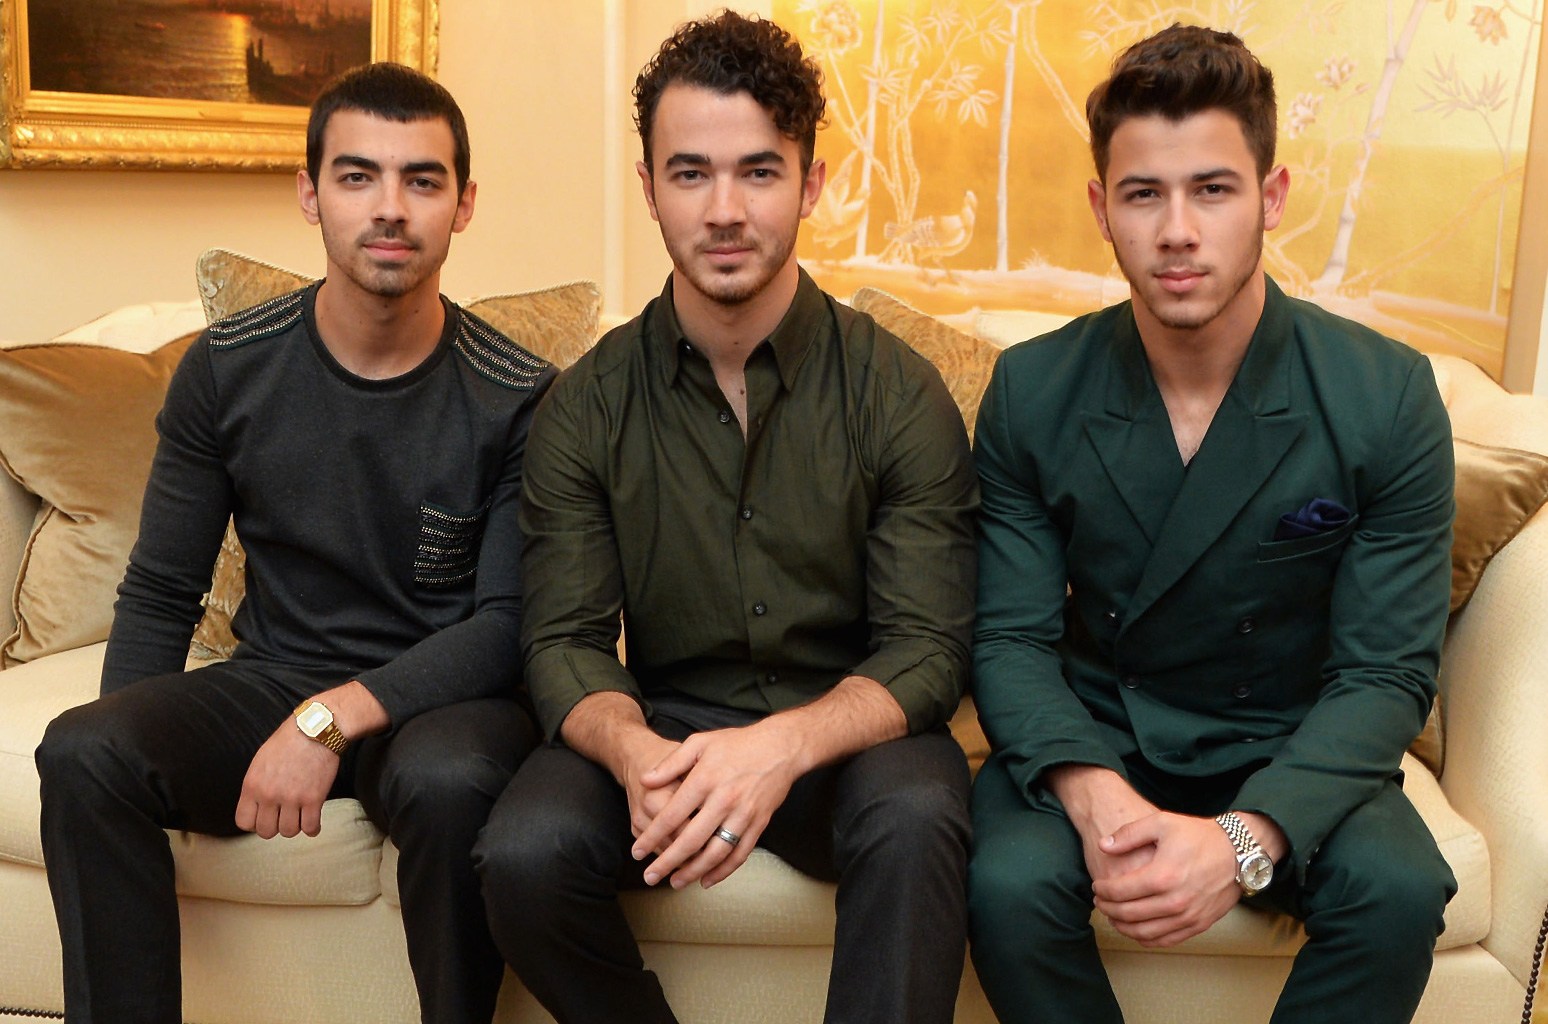 Let’s See If You Know Enough to Get 20/25 on This Mixed Knowledge Quiz The Jonas Brothers